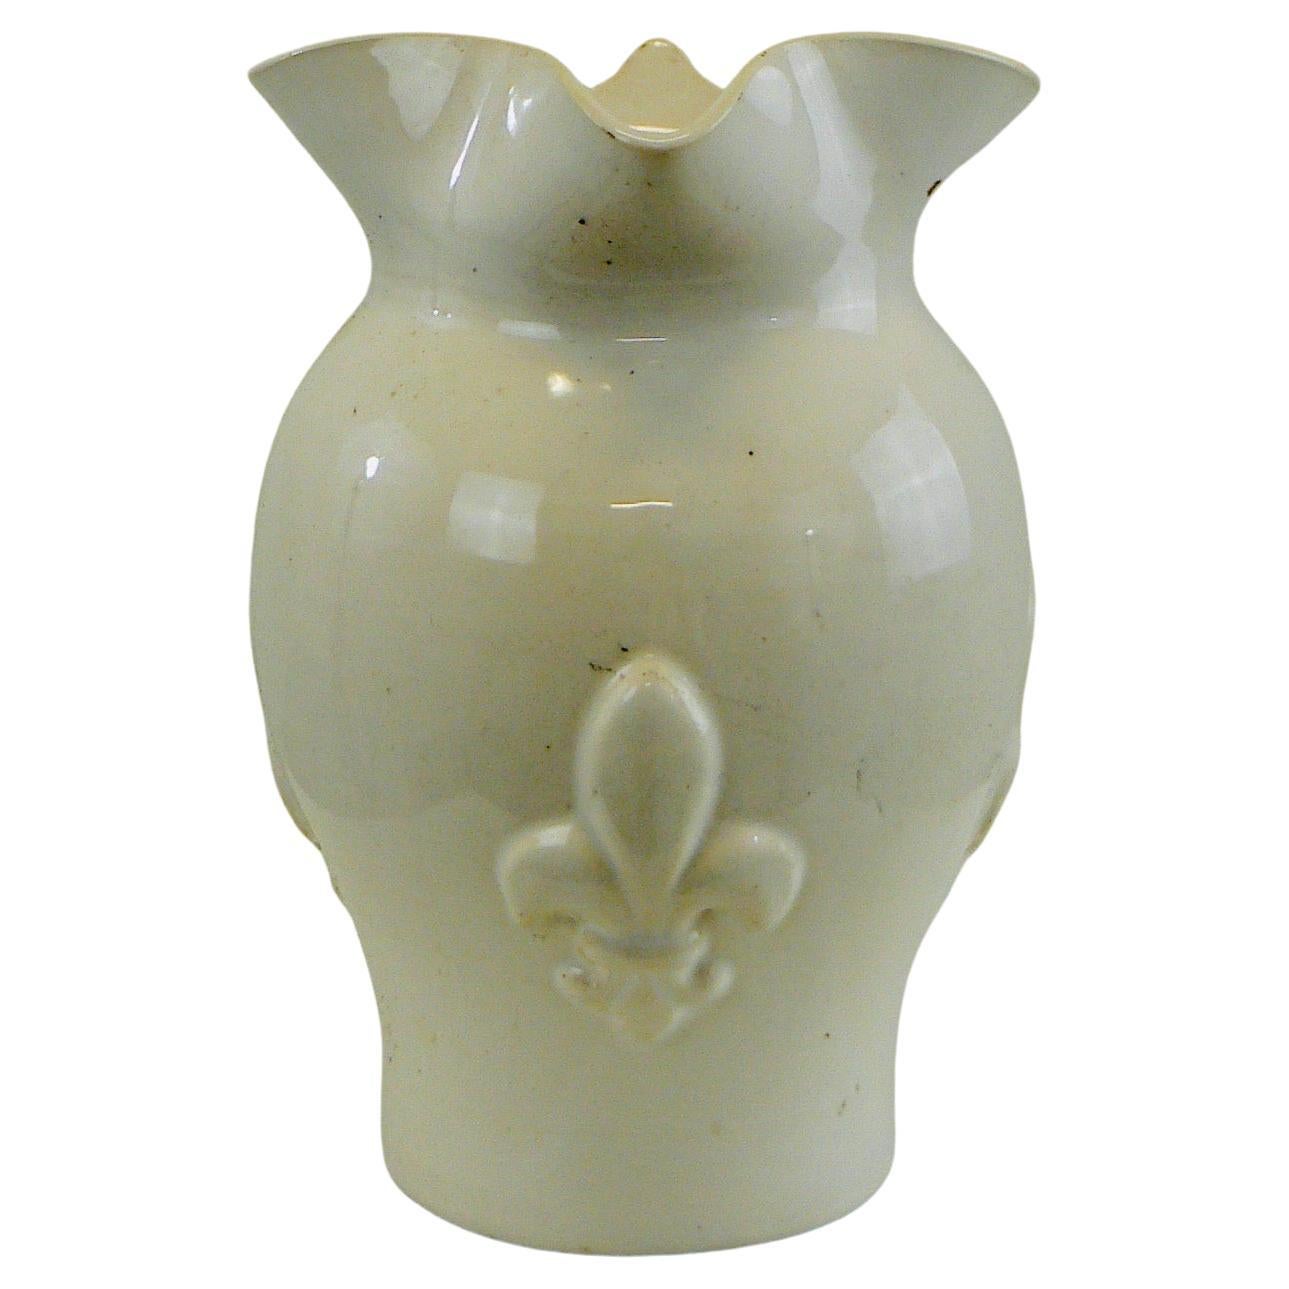 A white glazed ceramic water pitcher with a handle and fleur-de-lys decorations. In perfect condition.






